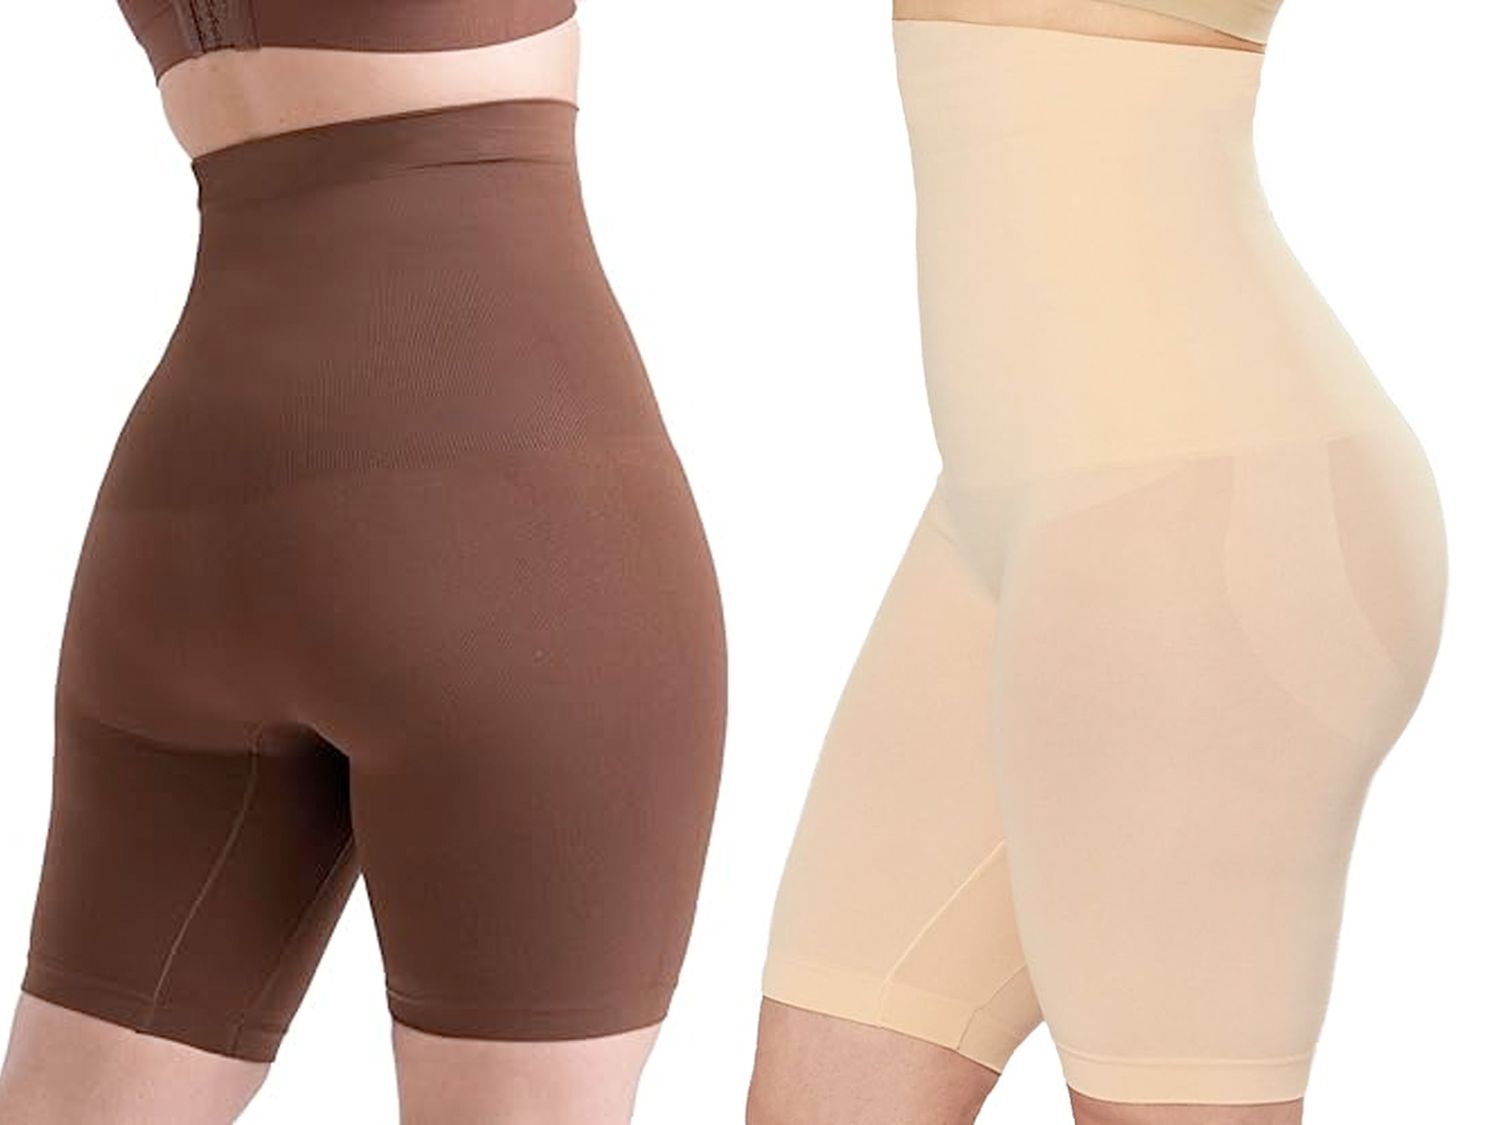 7 Guidelines for Selecting the Most Comfy Shapewear